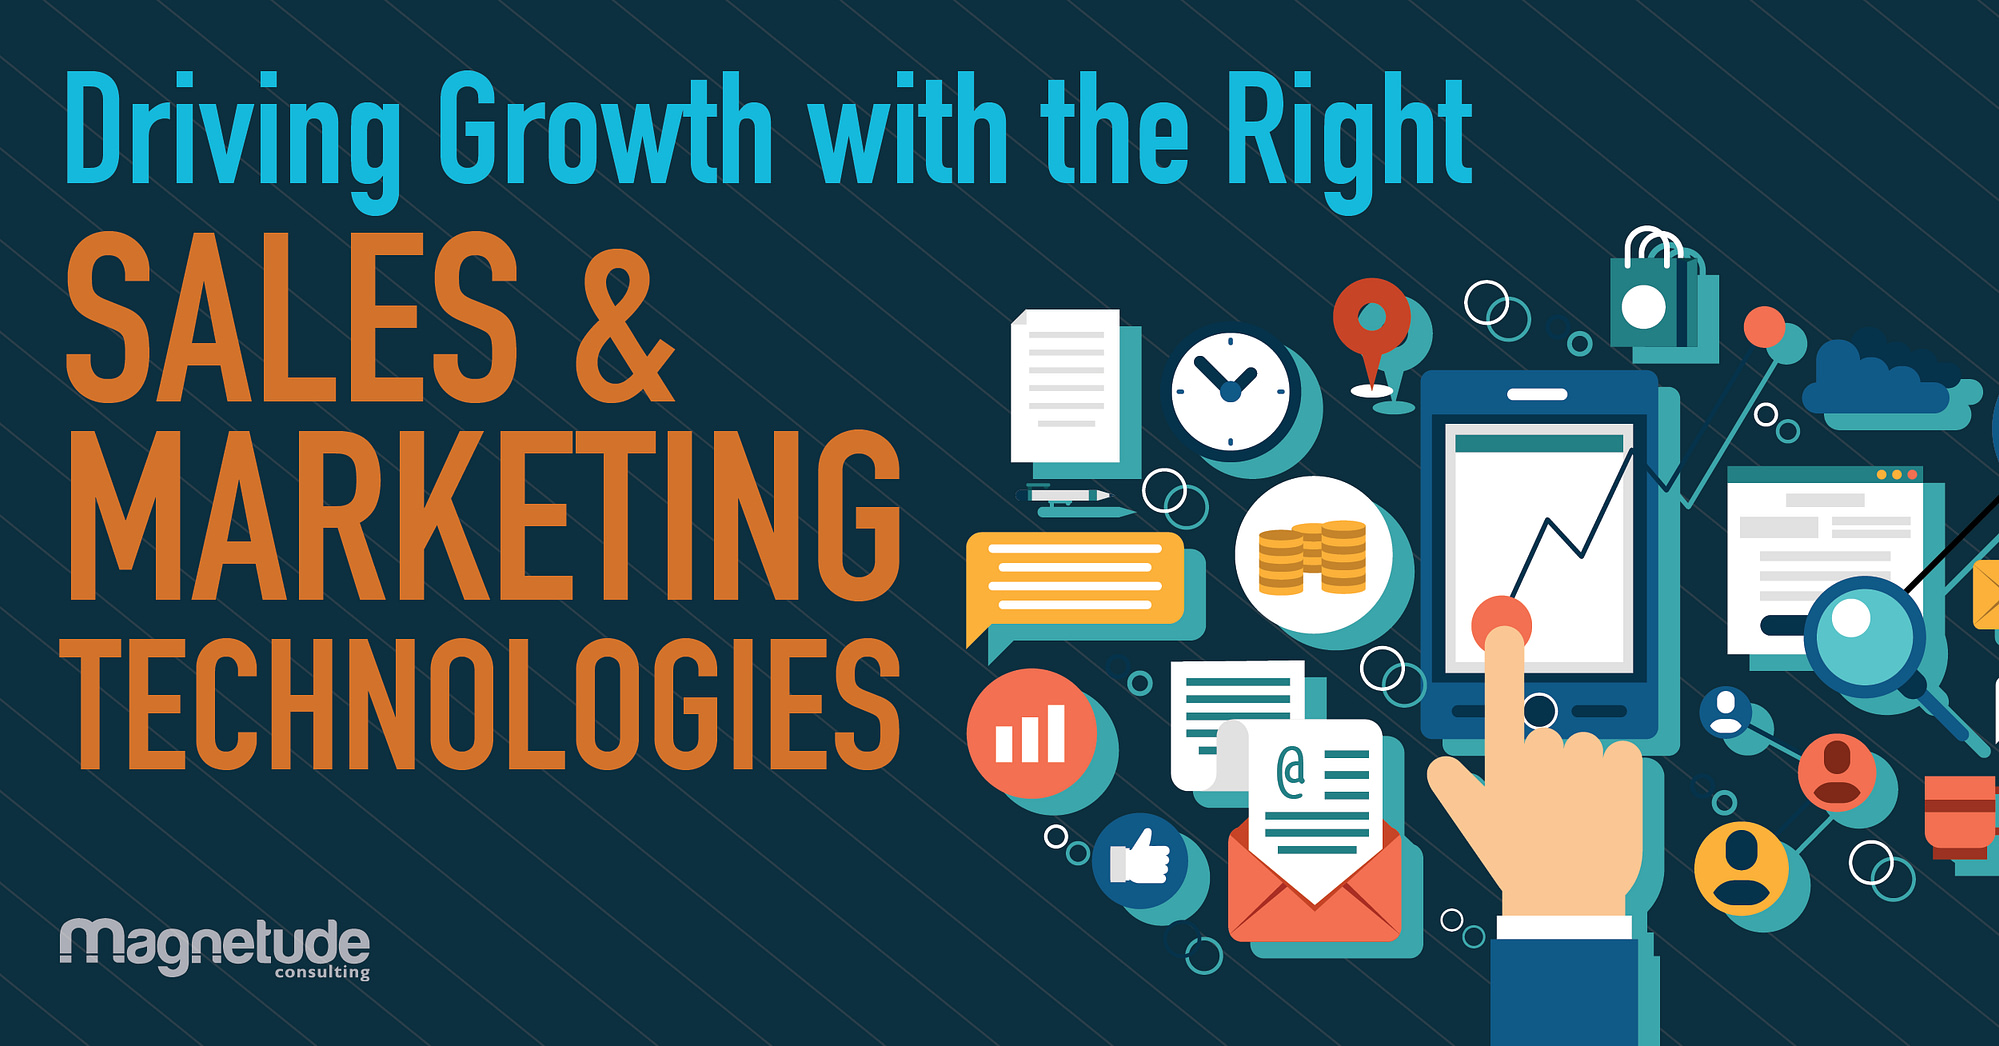 Driving Growth with the Right Sales & B2B Marketing Technologies